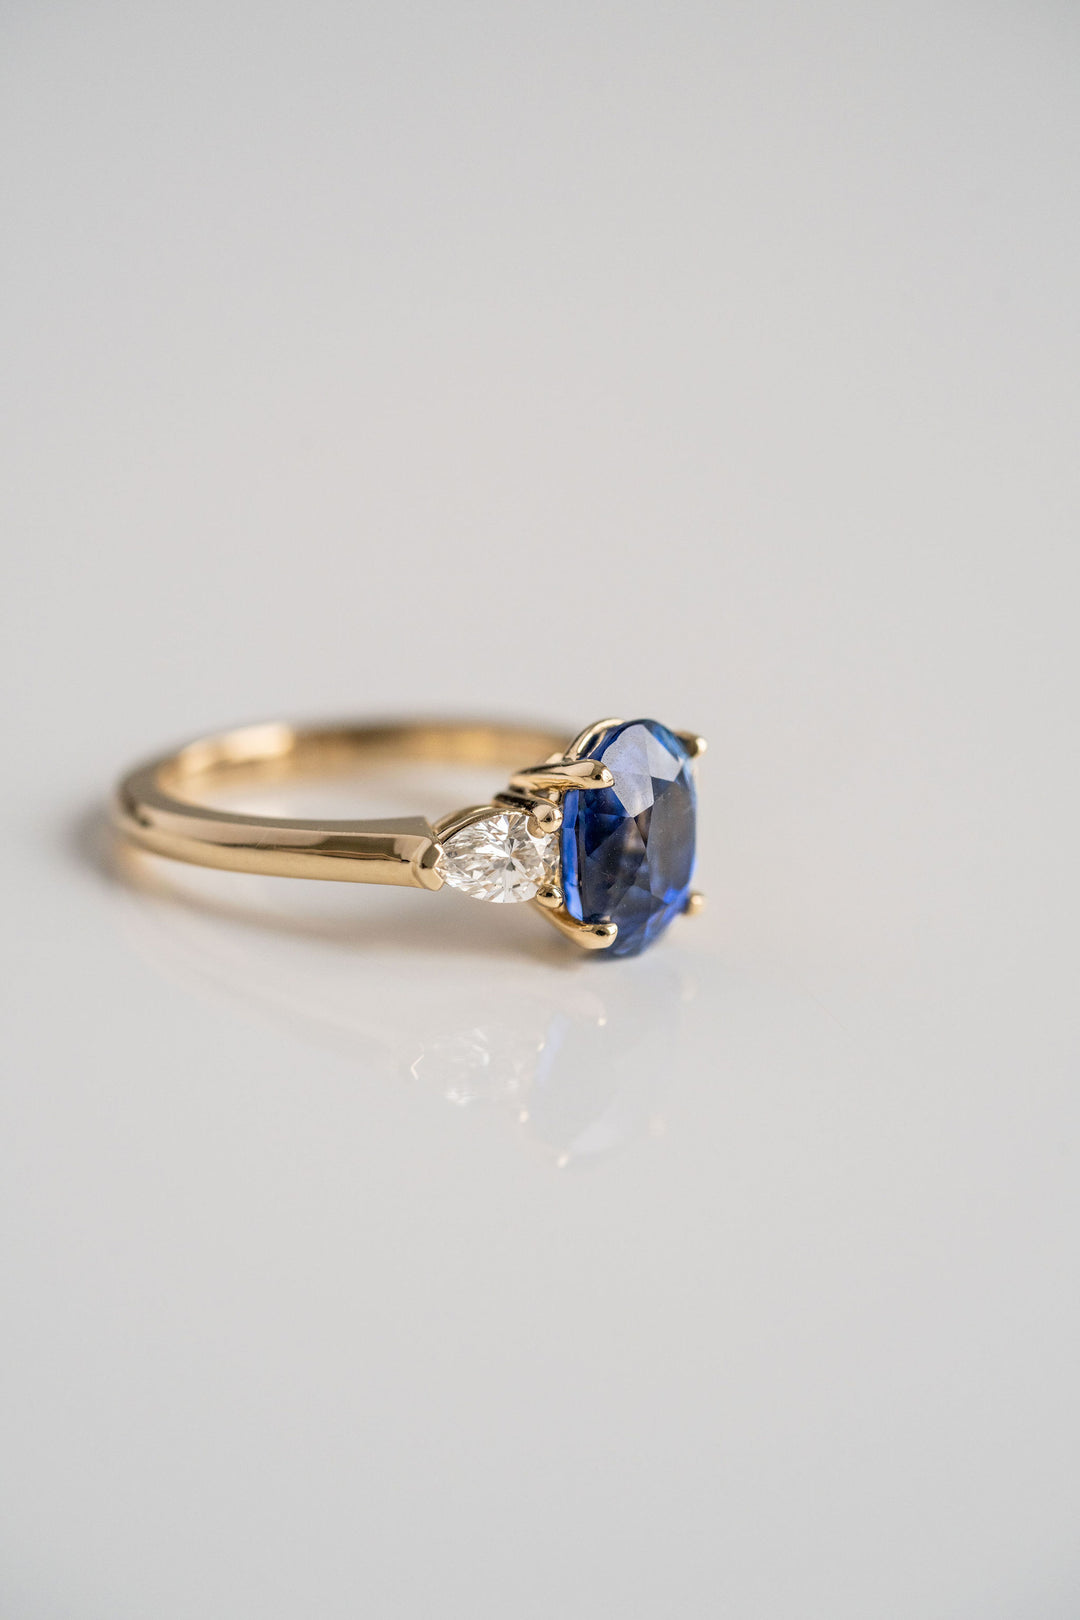 3.24ct. Oval Blue Sri Lankan Sapphire Engagement Ring With Pear Shape Diamond Accents, 14k Yellow Gold